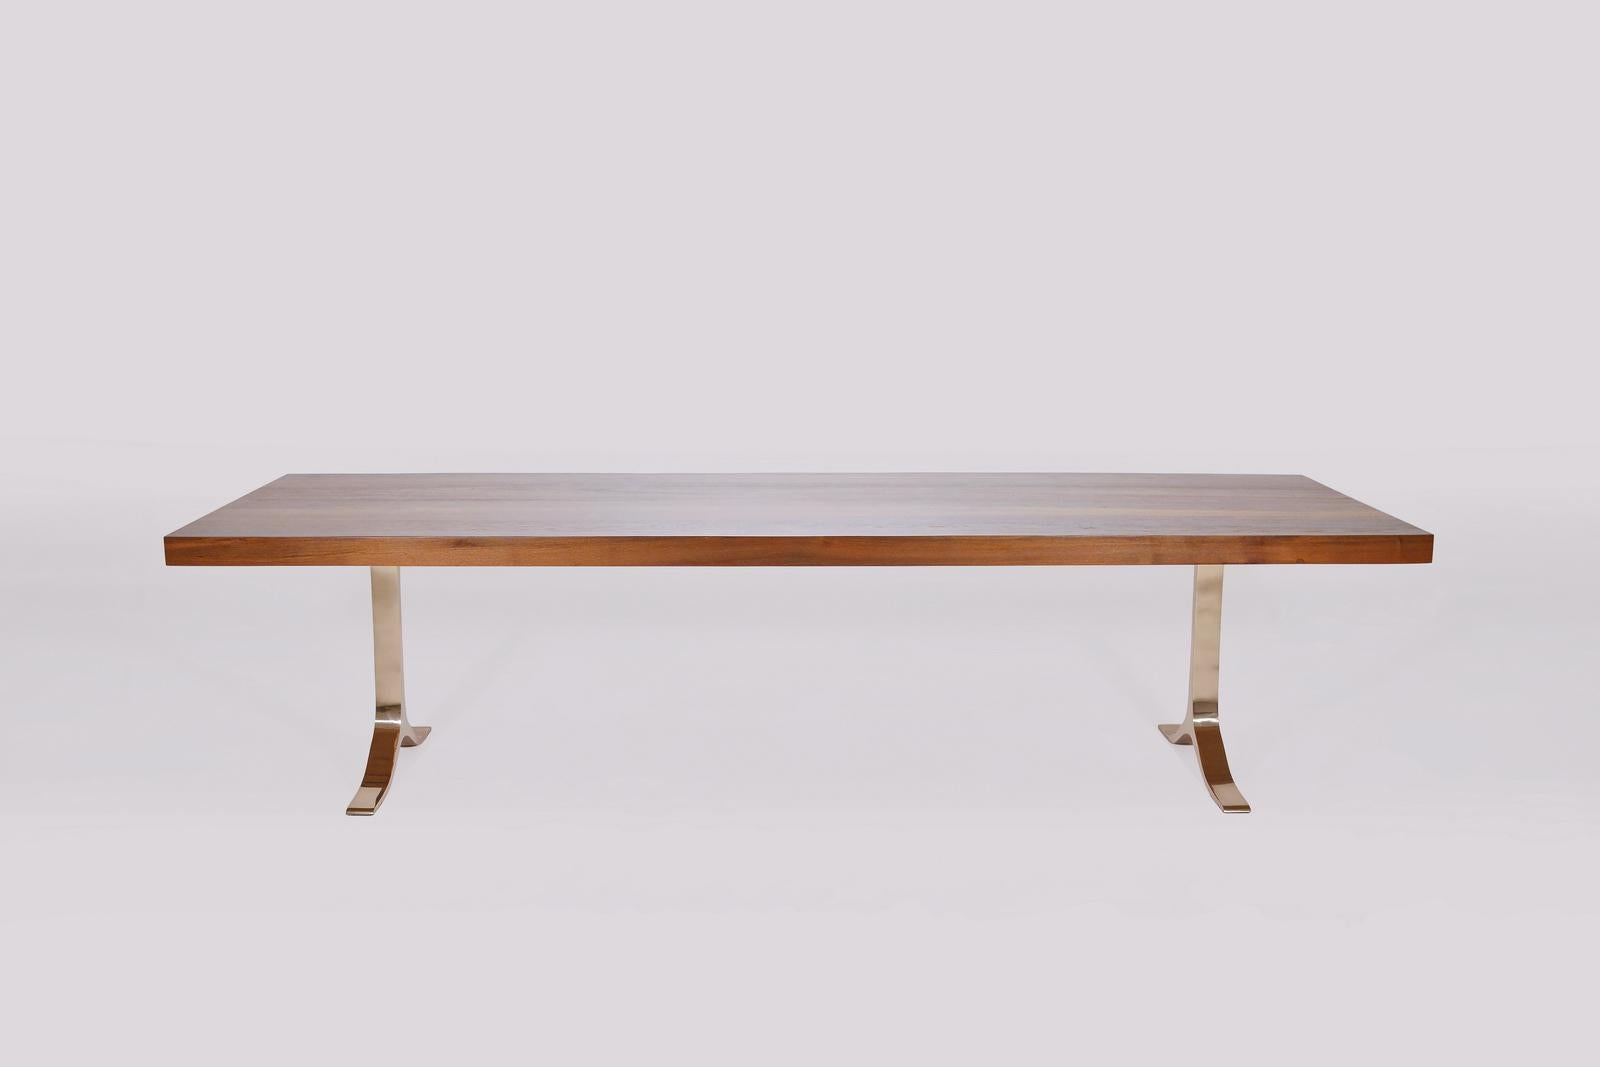 Model: FTOP-PT2L-BZ1-GT-DO
Top: Reclaimed hardwood
Top finish: Diamond oiled
Base: PT2L base, bronze 
Base finish: Polished
Dimensions: 300 x 96 x 73 cm
(W x D x H) inches 118.11 x 38.4 x 28.74 inch

P. Tendercool FTOPs – Fantastic tables, benches